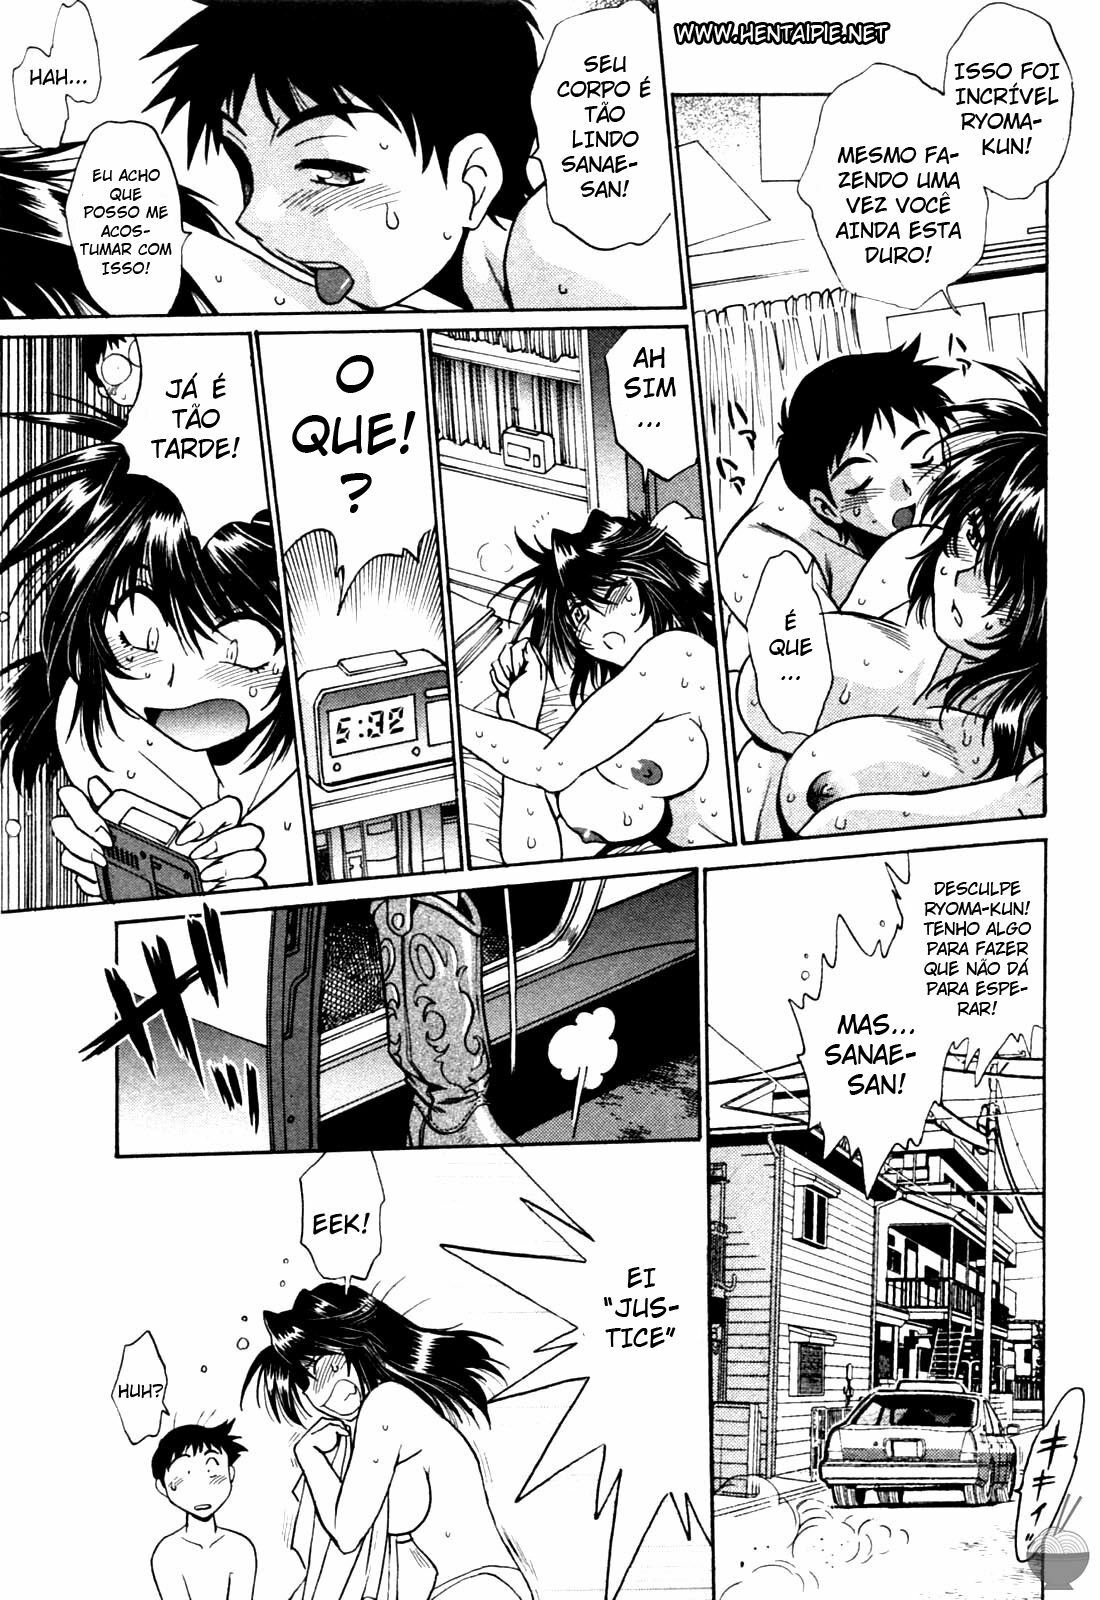 [Manabe Jouji] Ring x Mama 1 [Portuguese-BR] [HentaiPie] page 29 full